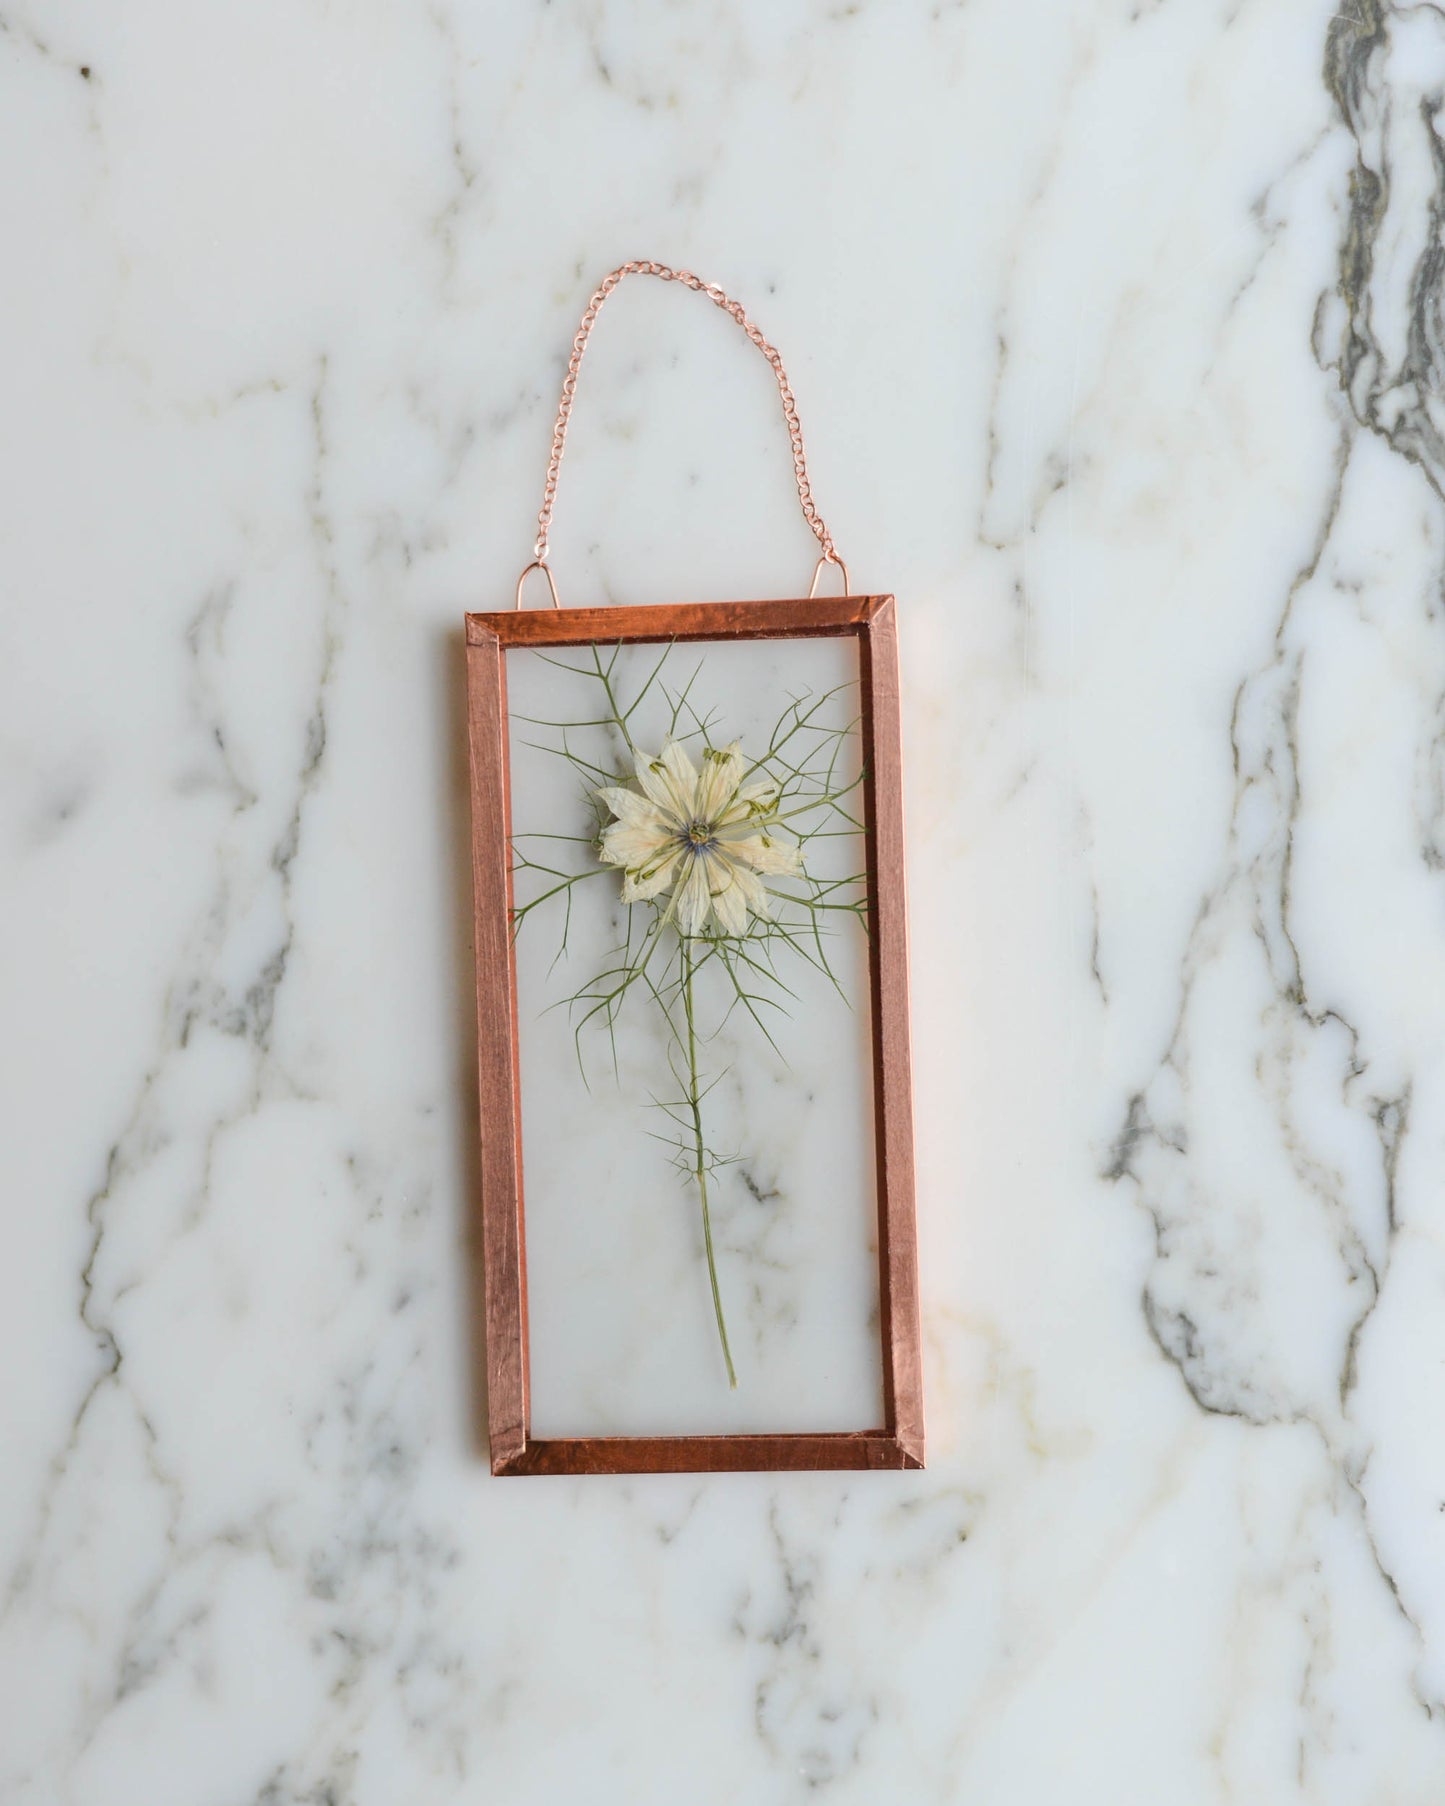 Tiny Flowers - Real Pressed Flowers in Small Glass and Copper Wall Hanging